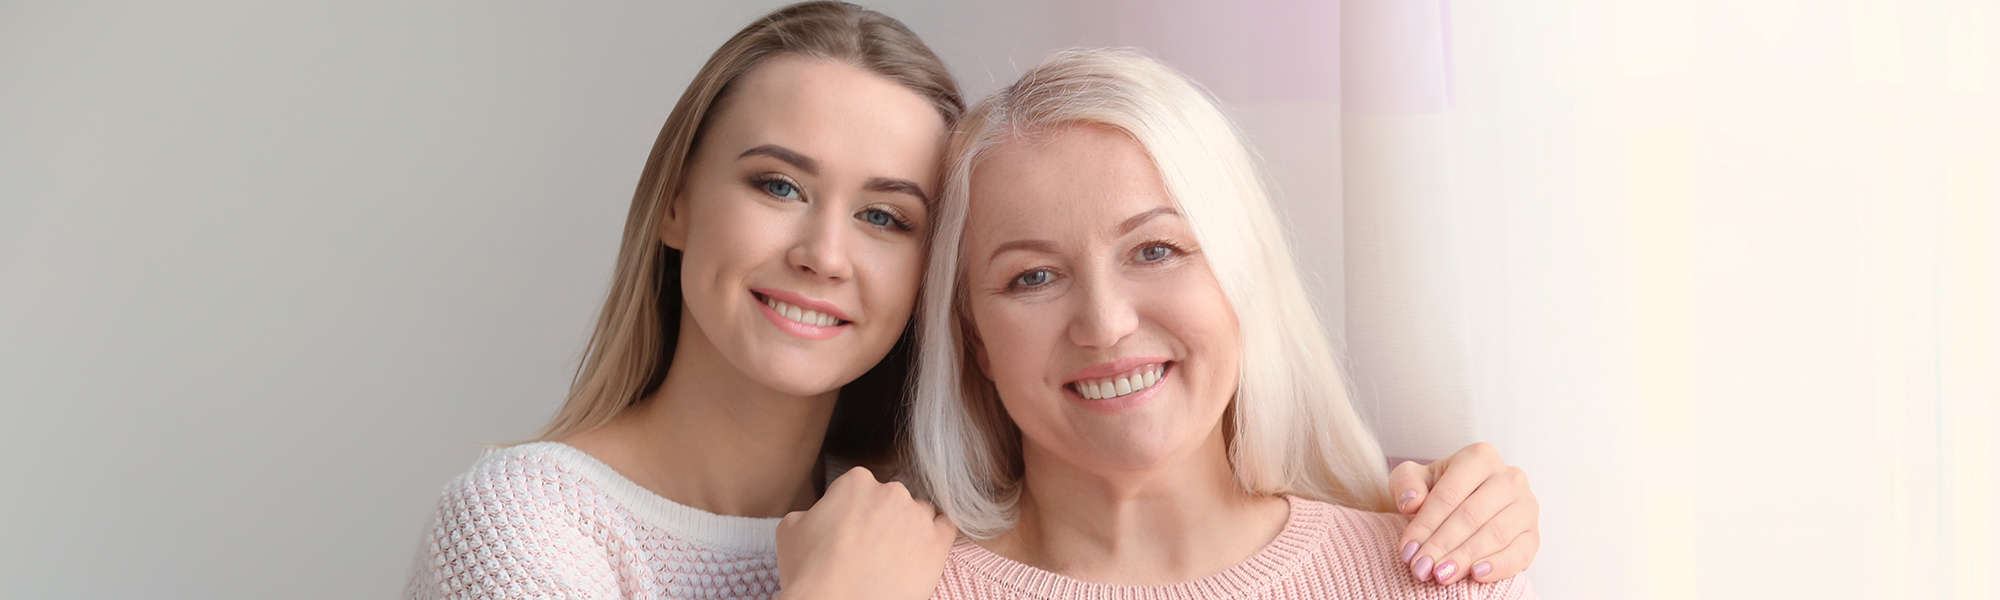 Younger daughter and older lady partially hug and smile at camera